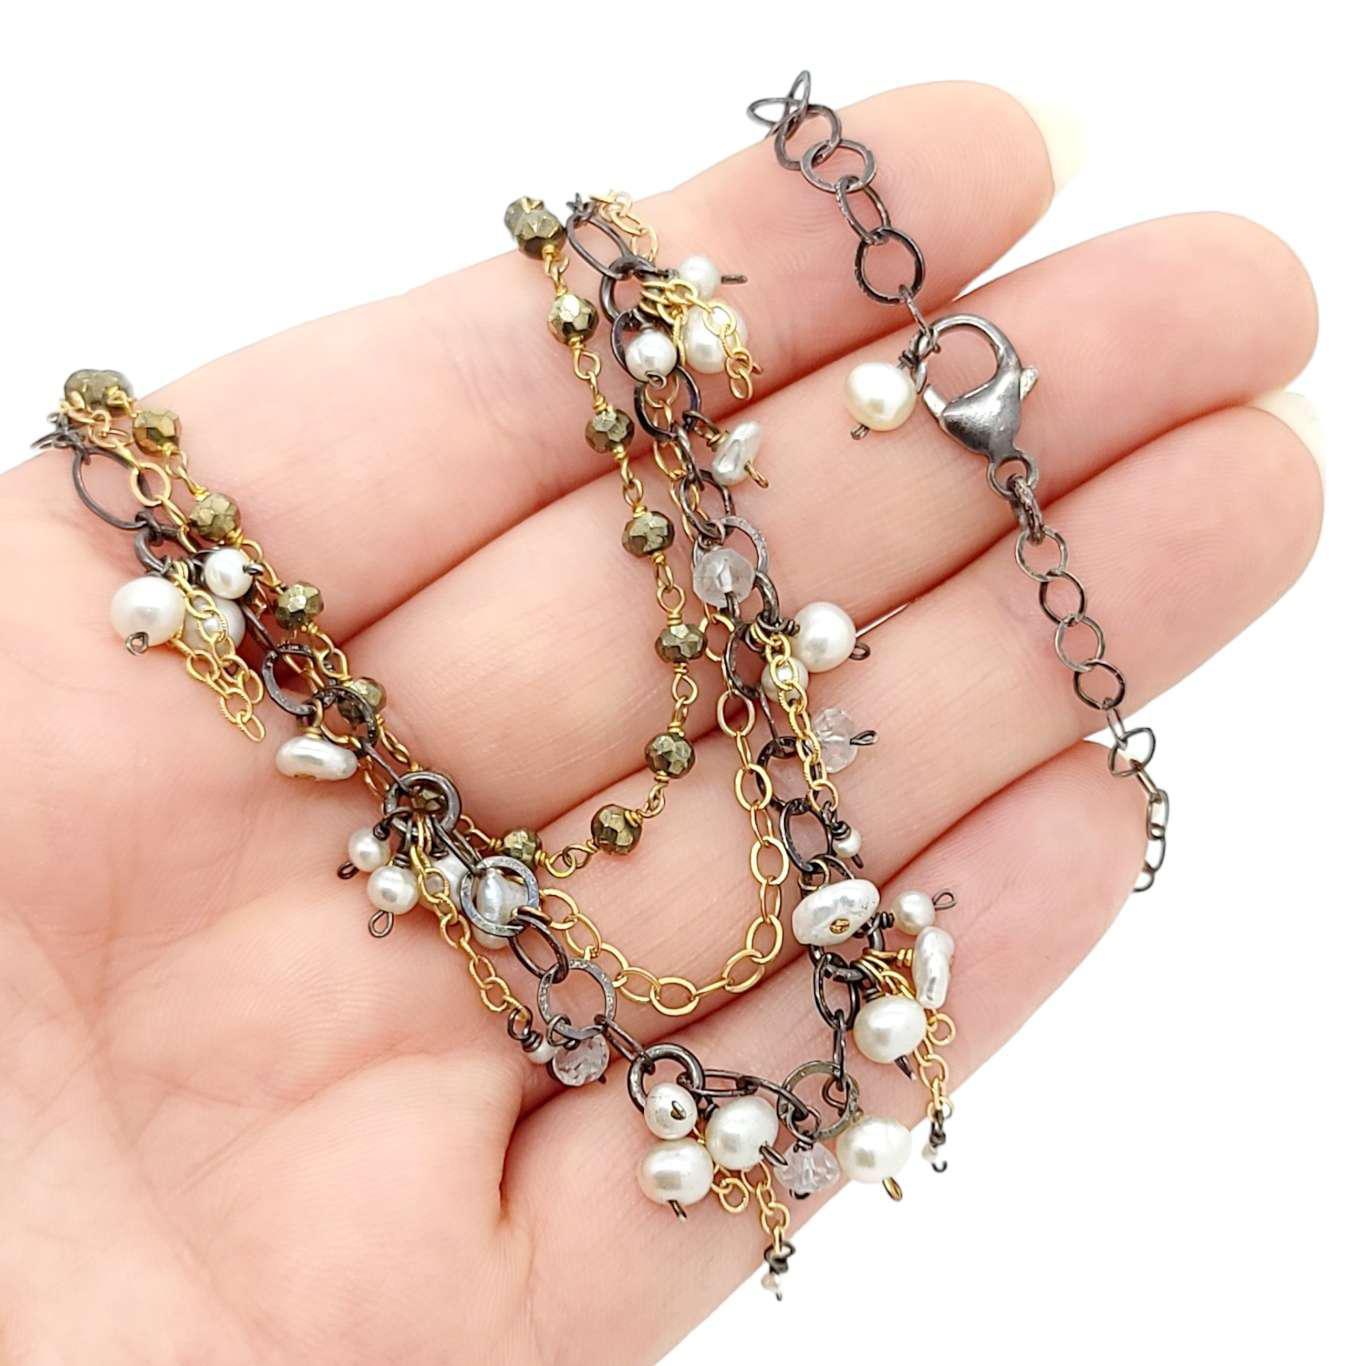 Necklace - Multi-Strand Pearls and Pyrite by Calliope Jewelry